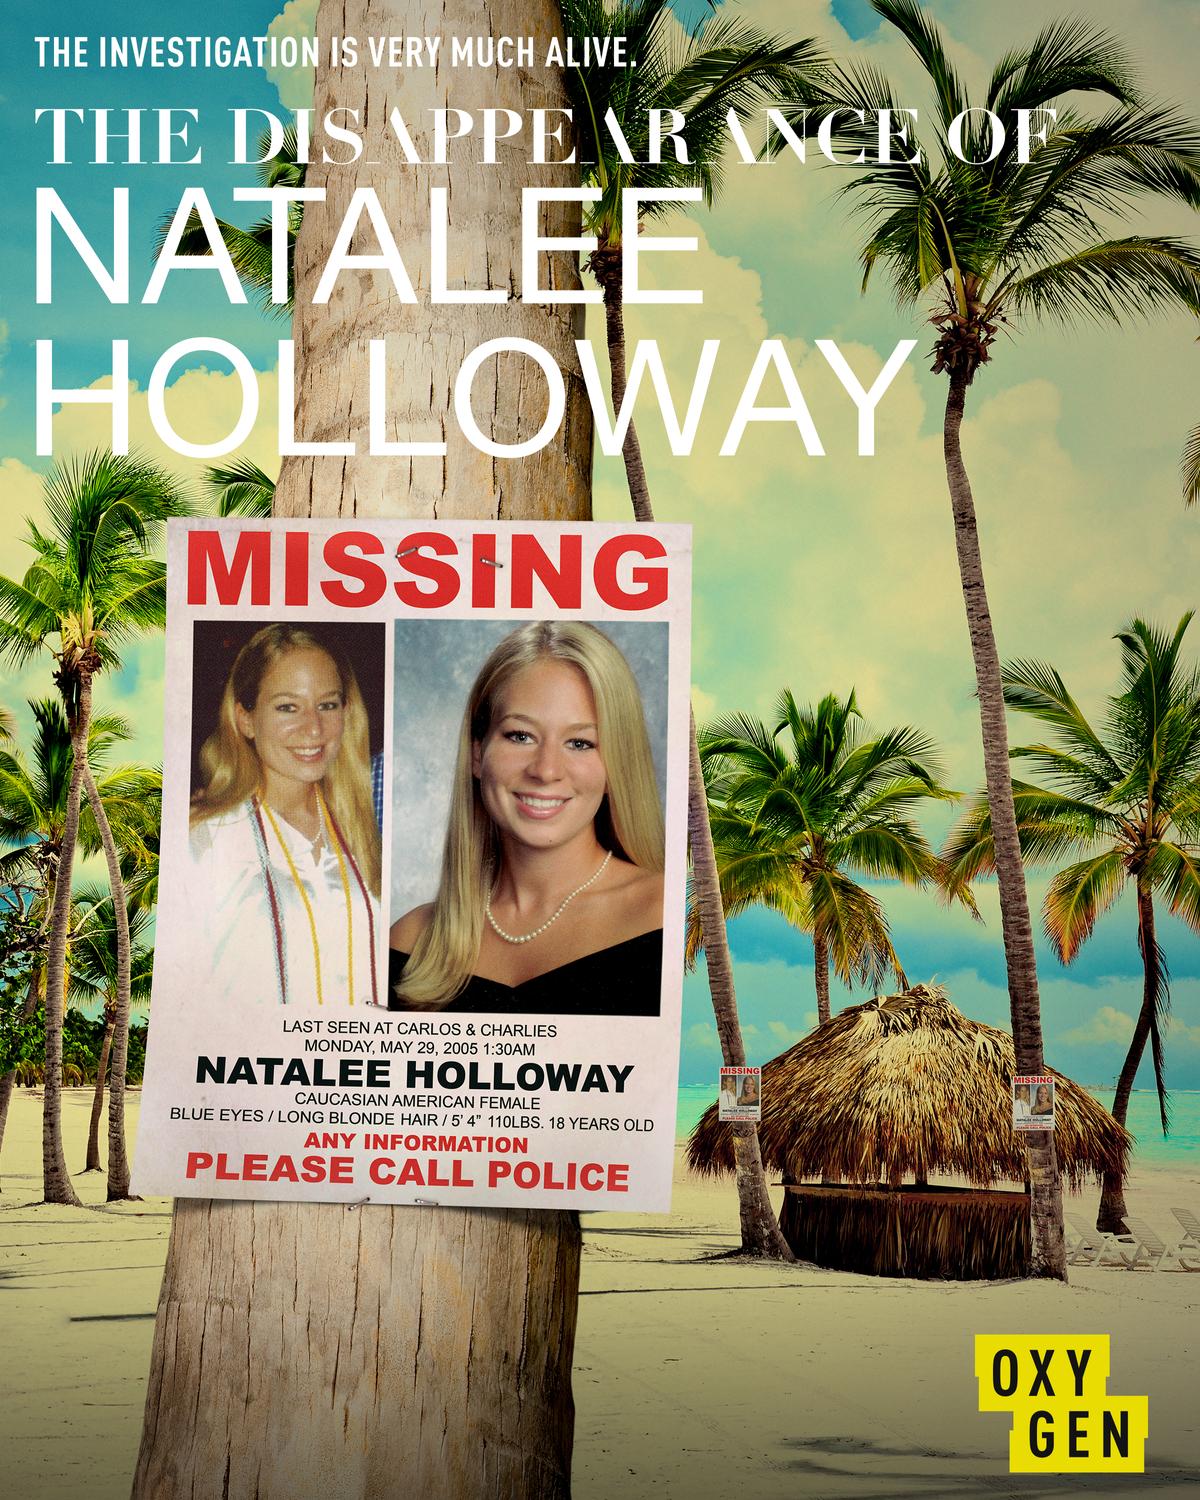 Grisly details about Holloway's disappearance emerged in the third episode of the Oxygen series The Disappearance of Natalee Holloway. (NBC Universal)